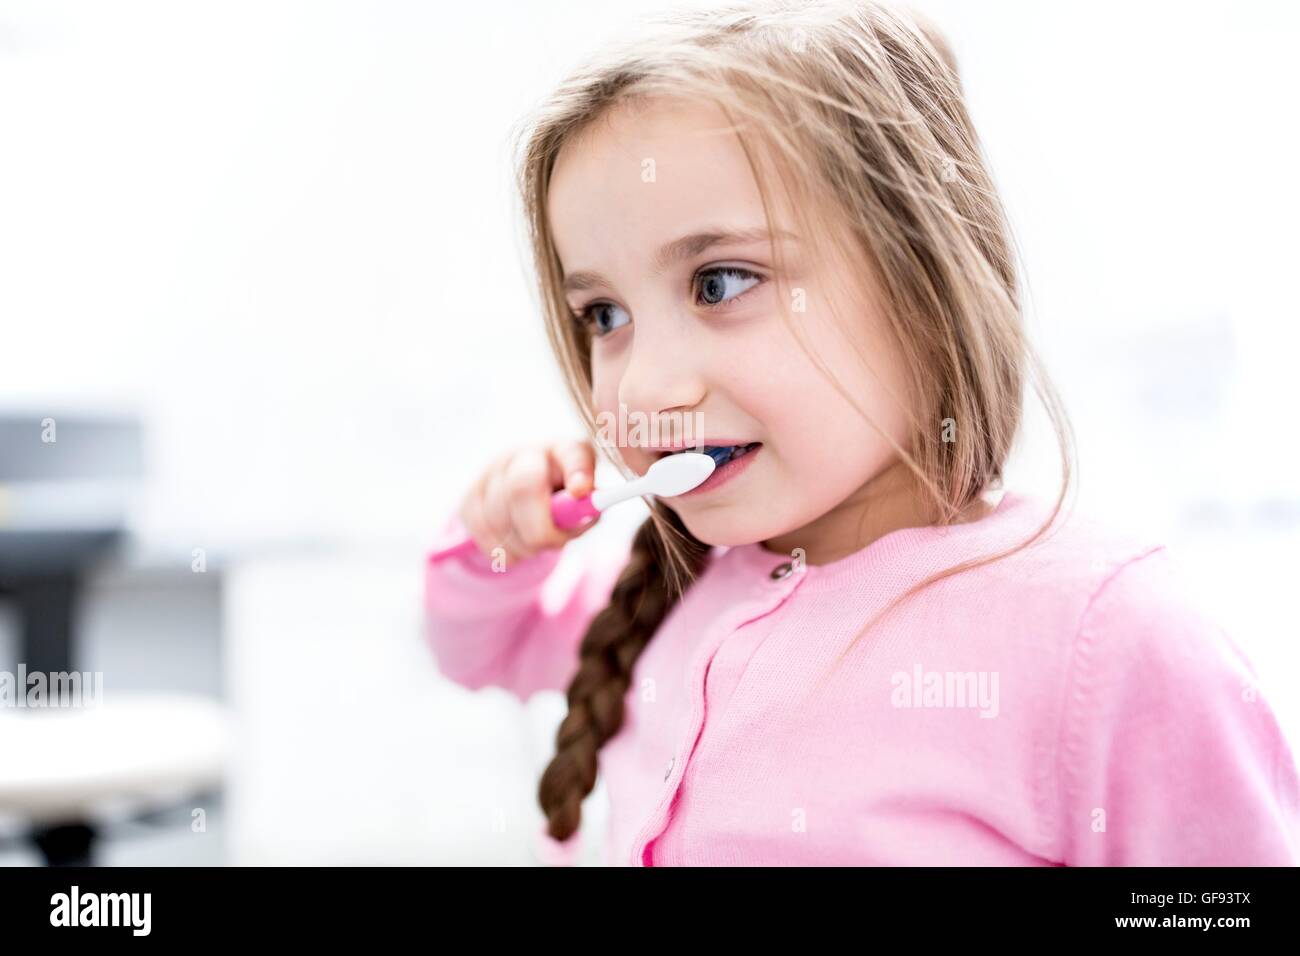 MODEL RELEASED. Girl brushing teeth, close-up. Stock Photo